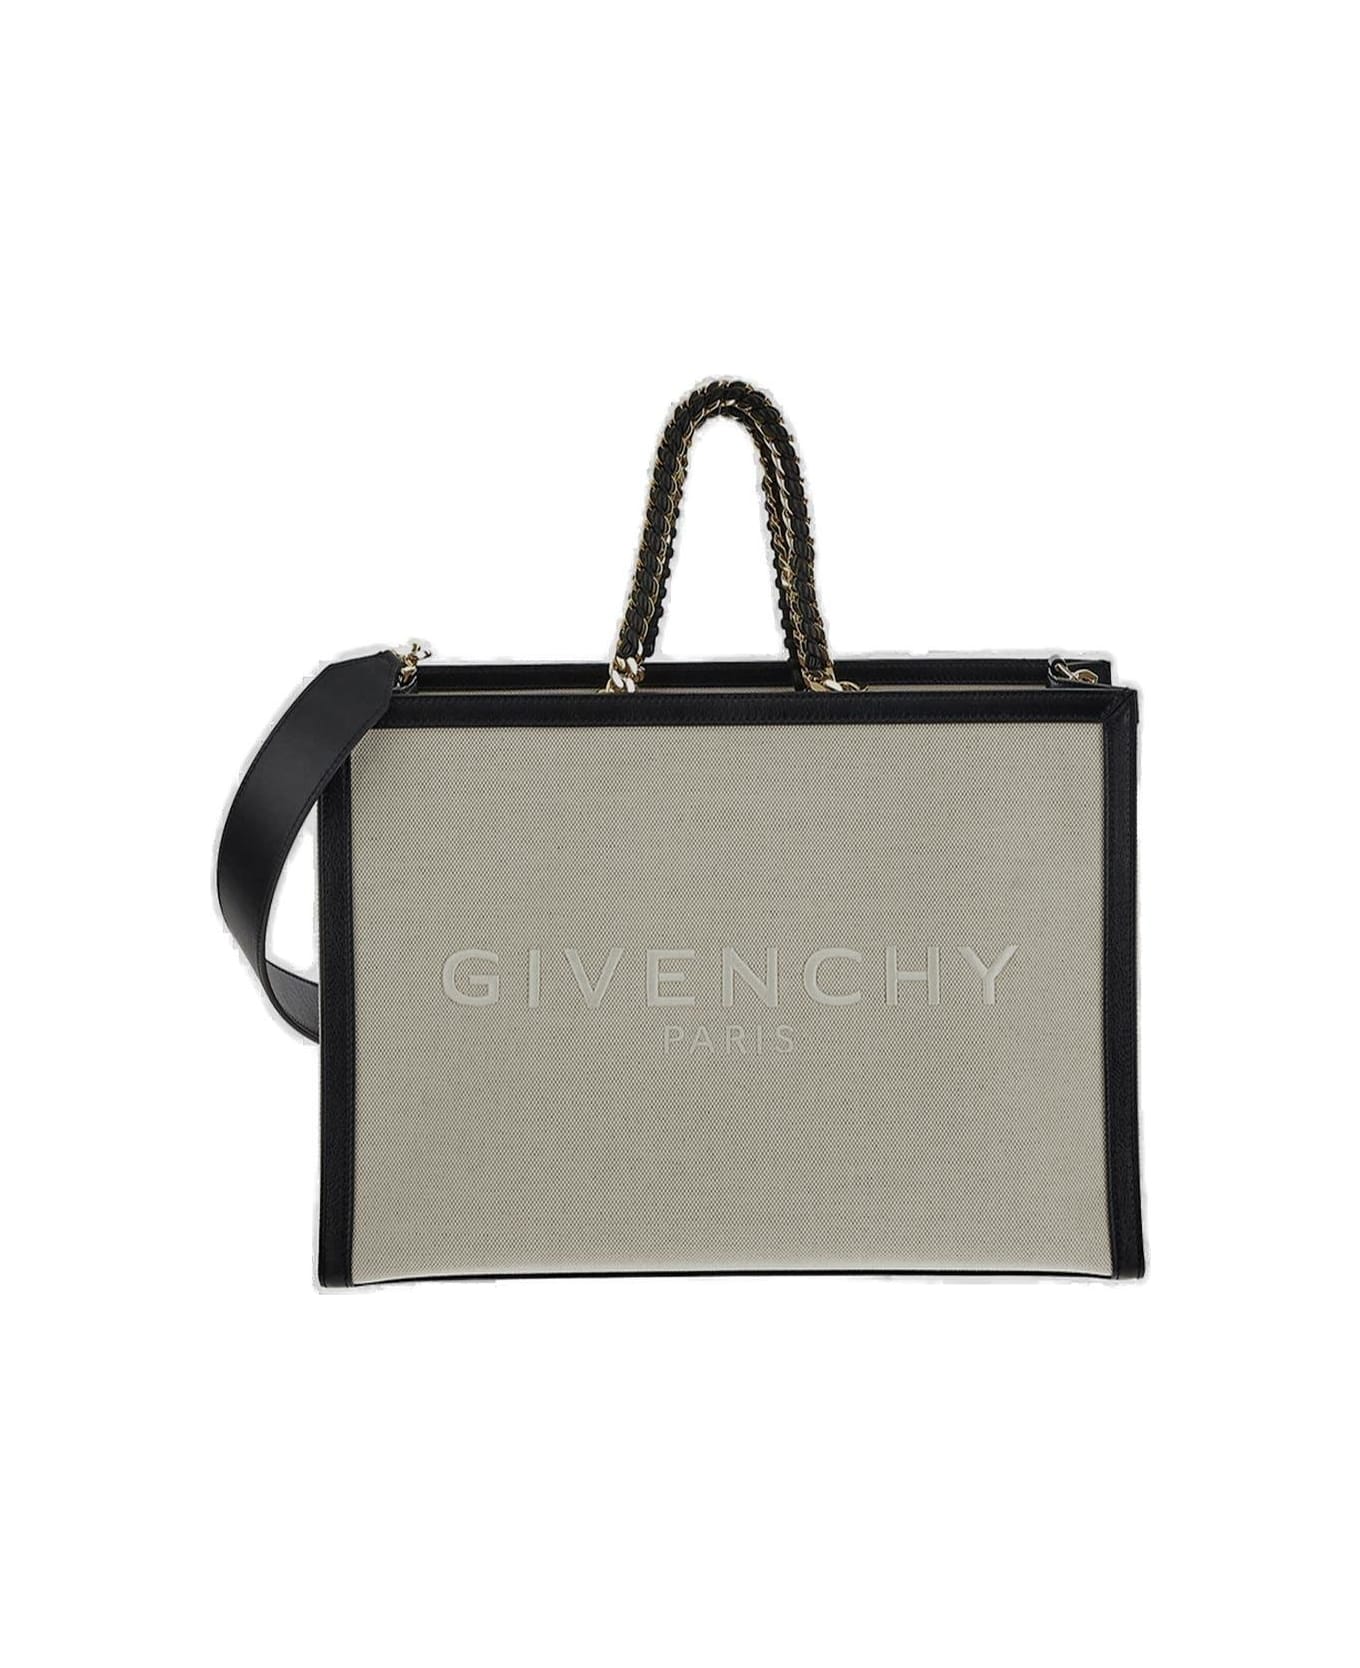 Givenchy Logo Embroidered Tote Bag - NATURAL BEIGE